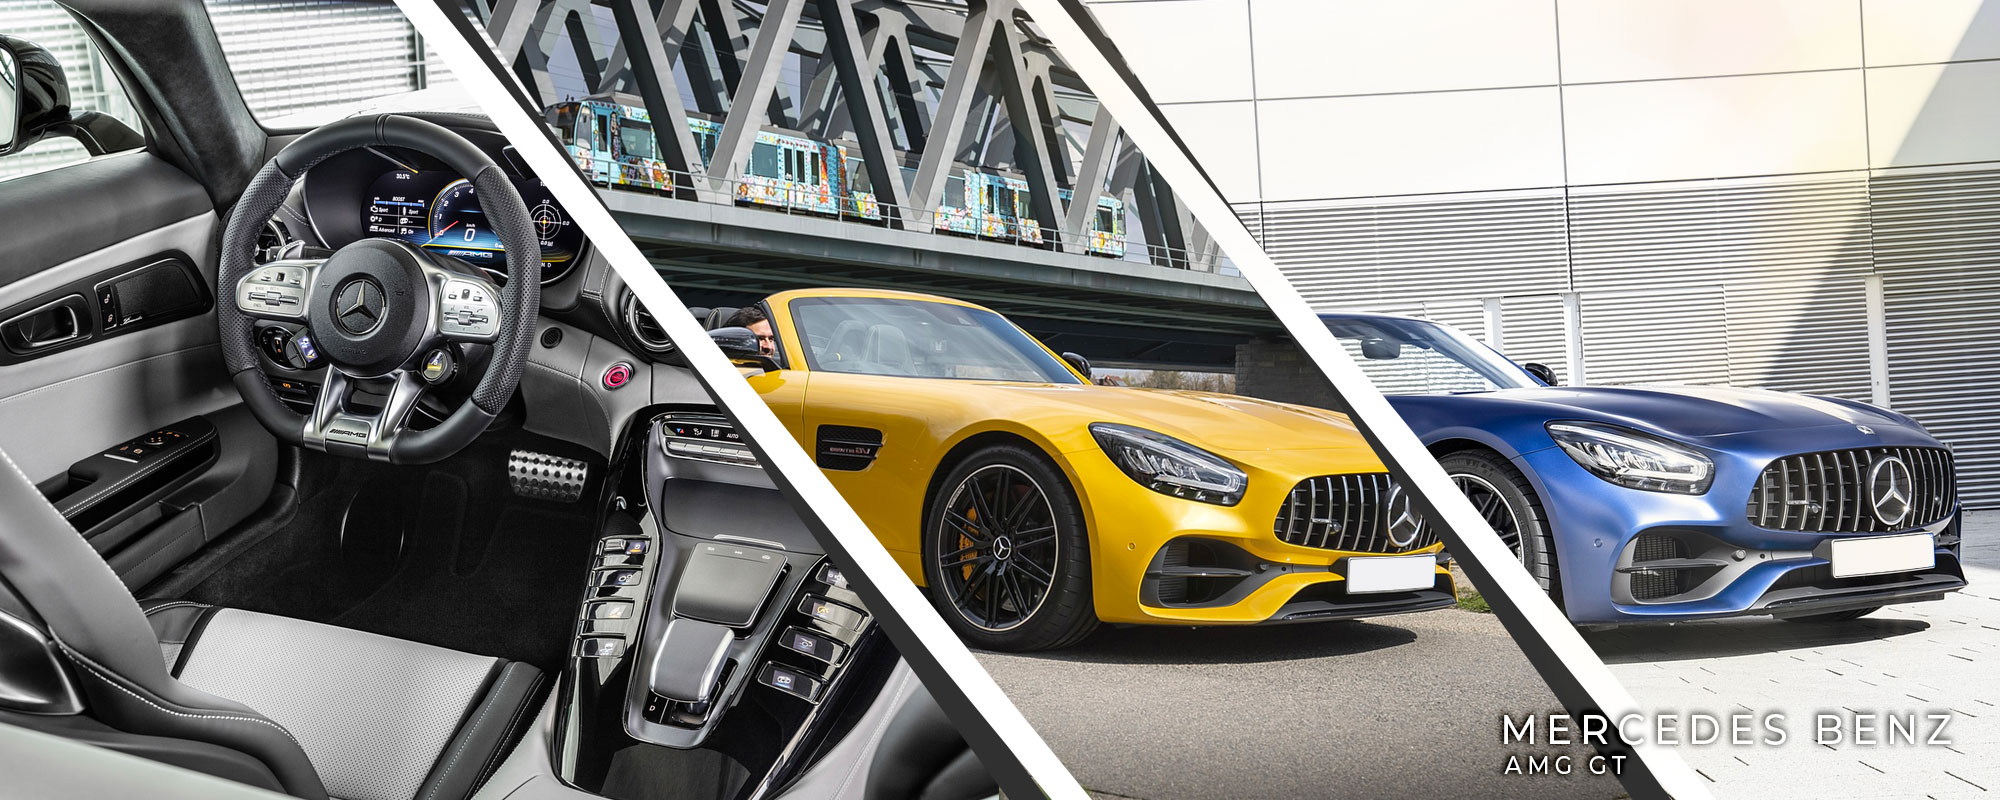 Starr Luxury Cars - Mercedes Benz AMG GT Self-hire and Chauffeur service, where exclusivity meets the opulence with the best coveted and exotica cars, - UK, Berkeley square, Mayfair